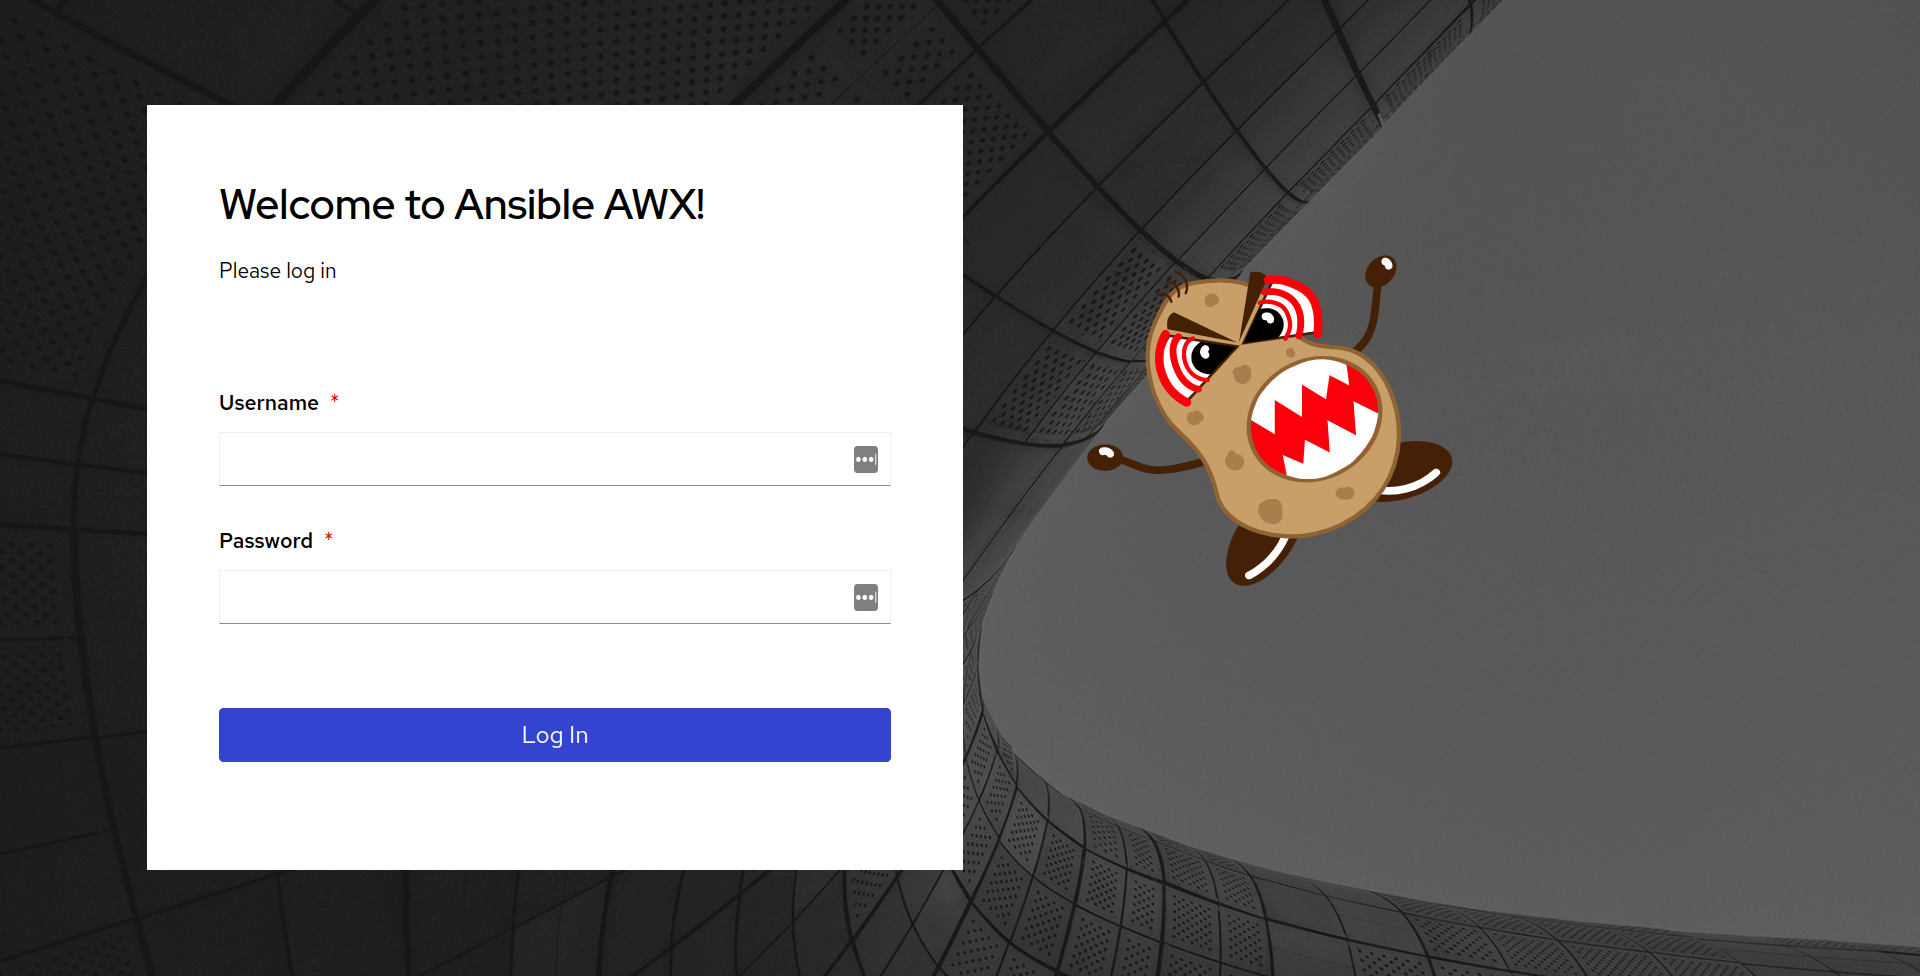 Run the latest Ansible AWX in Docker containers